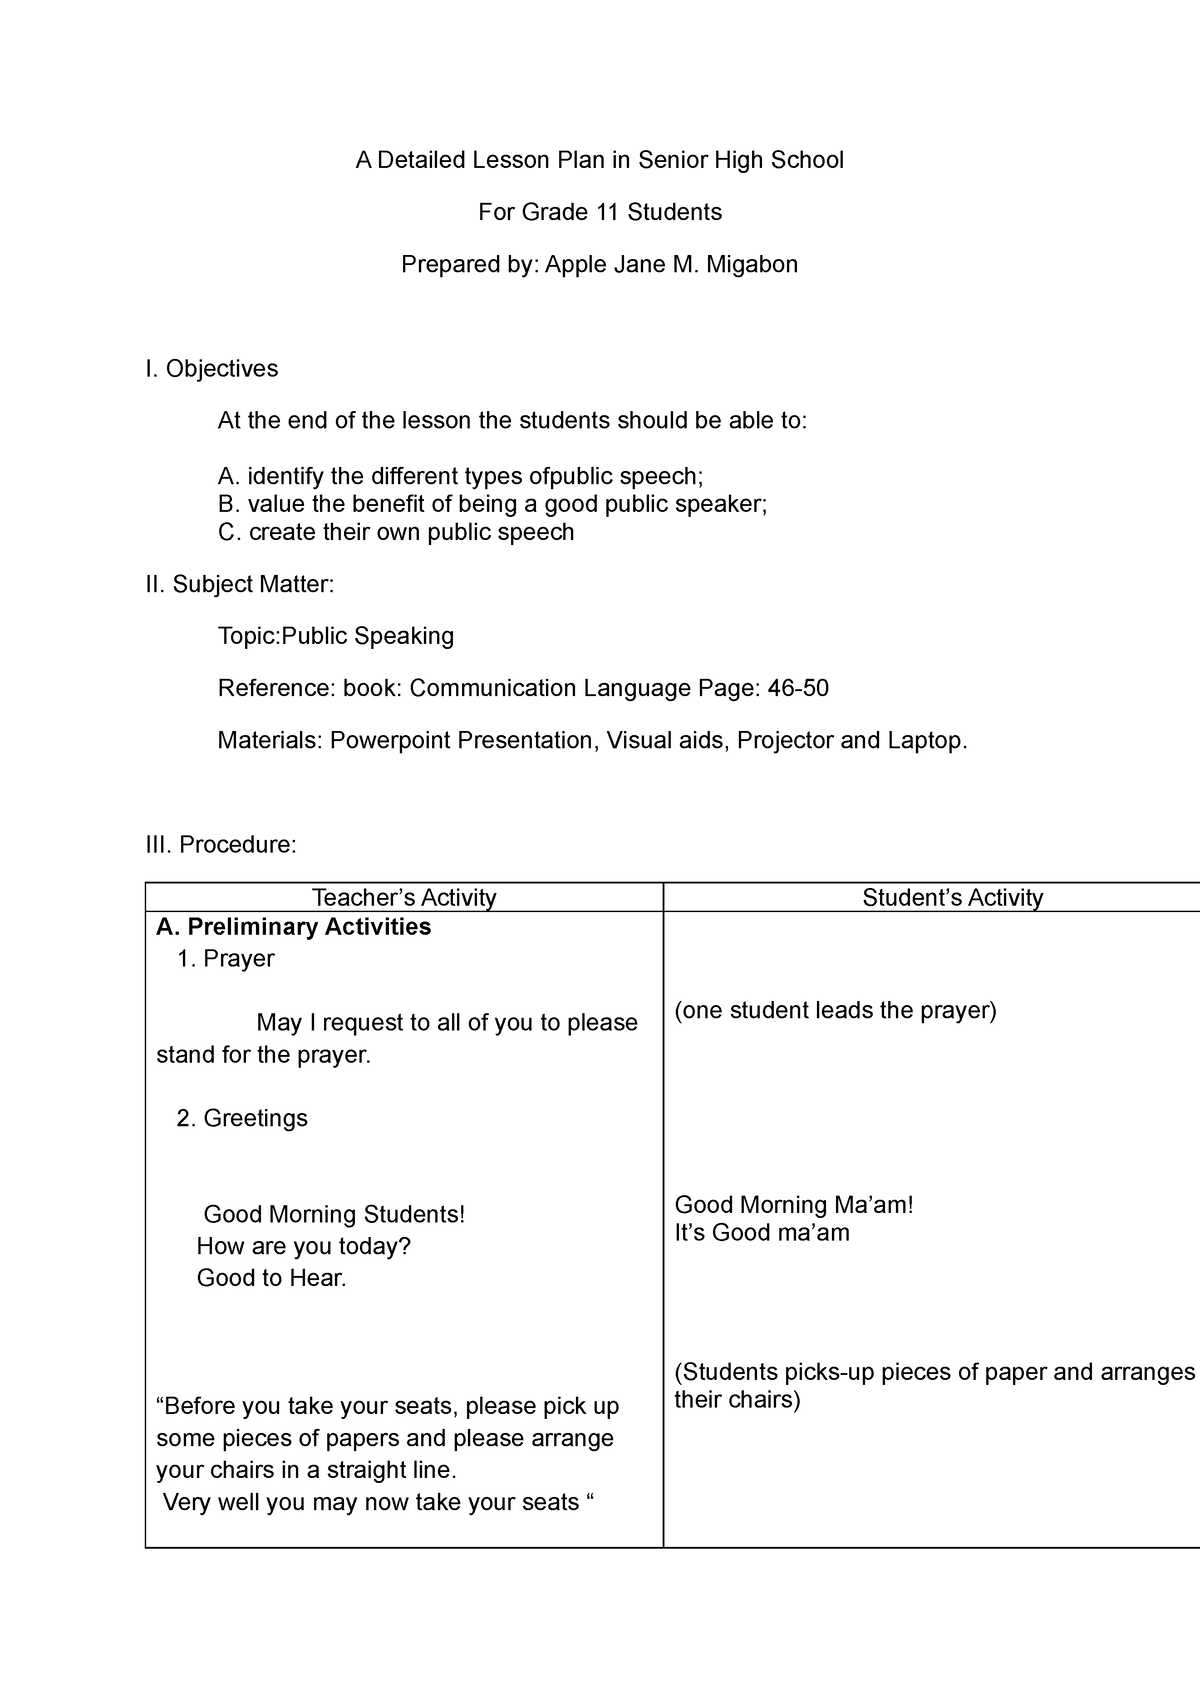 A Detailed Lesson Plan in English - A Detailed Lesson Plan in Senior ...